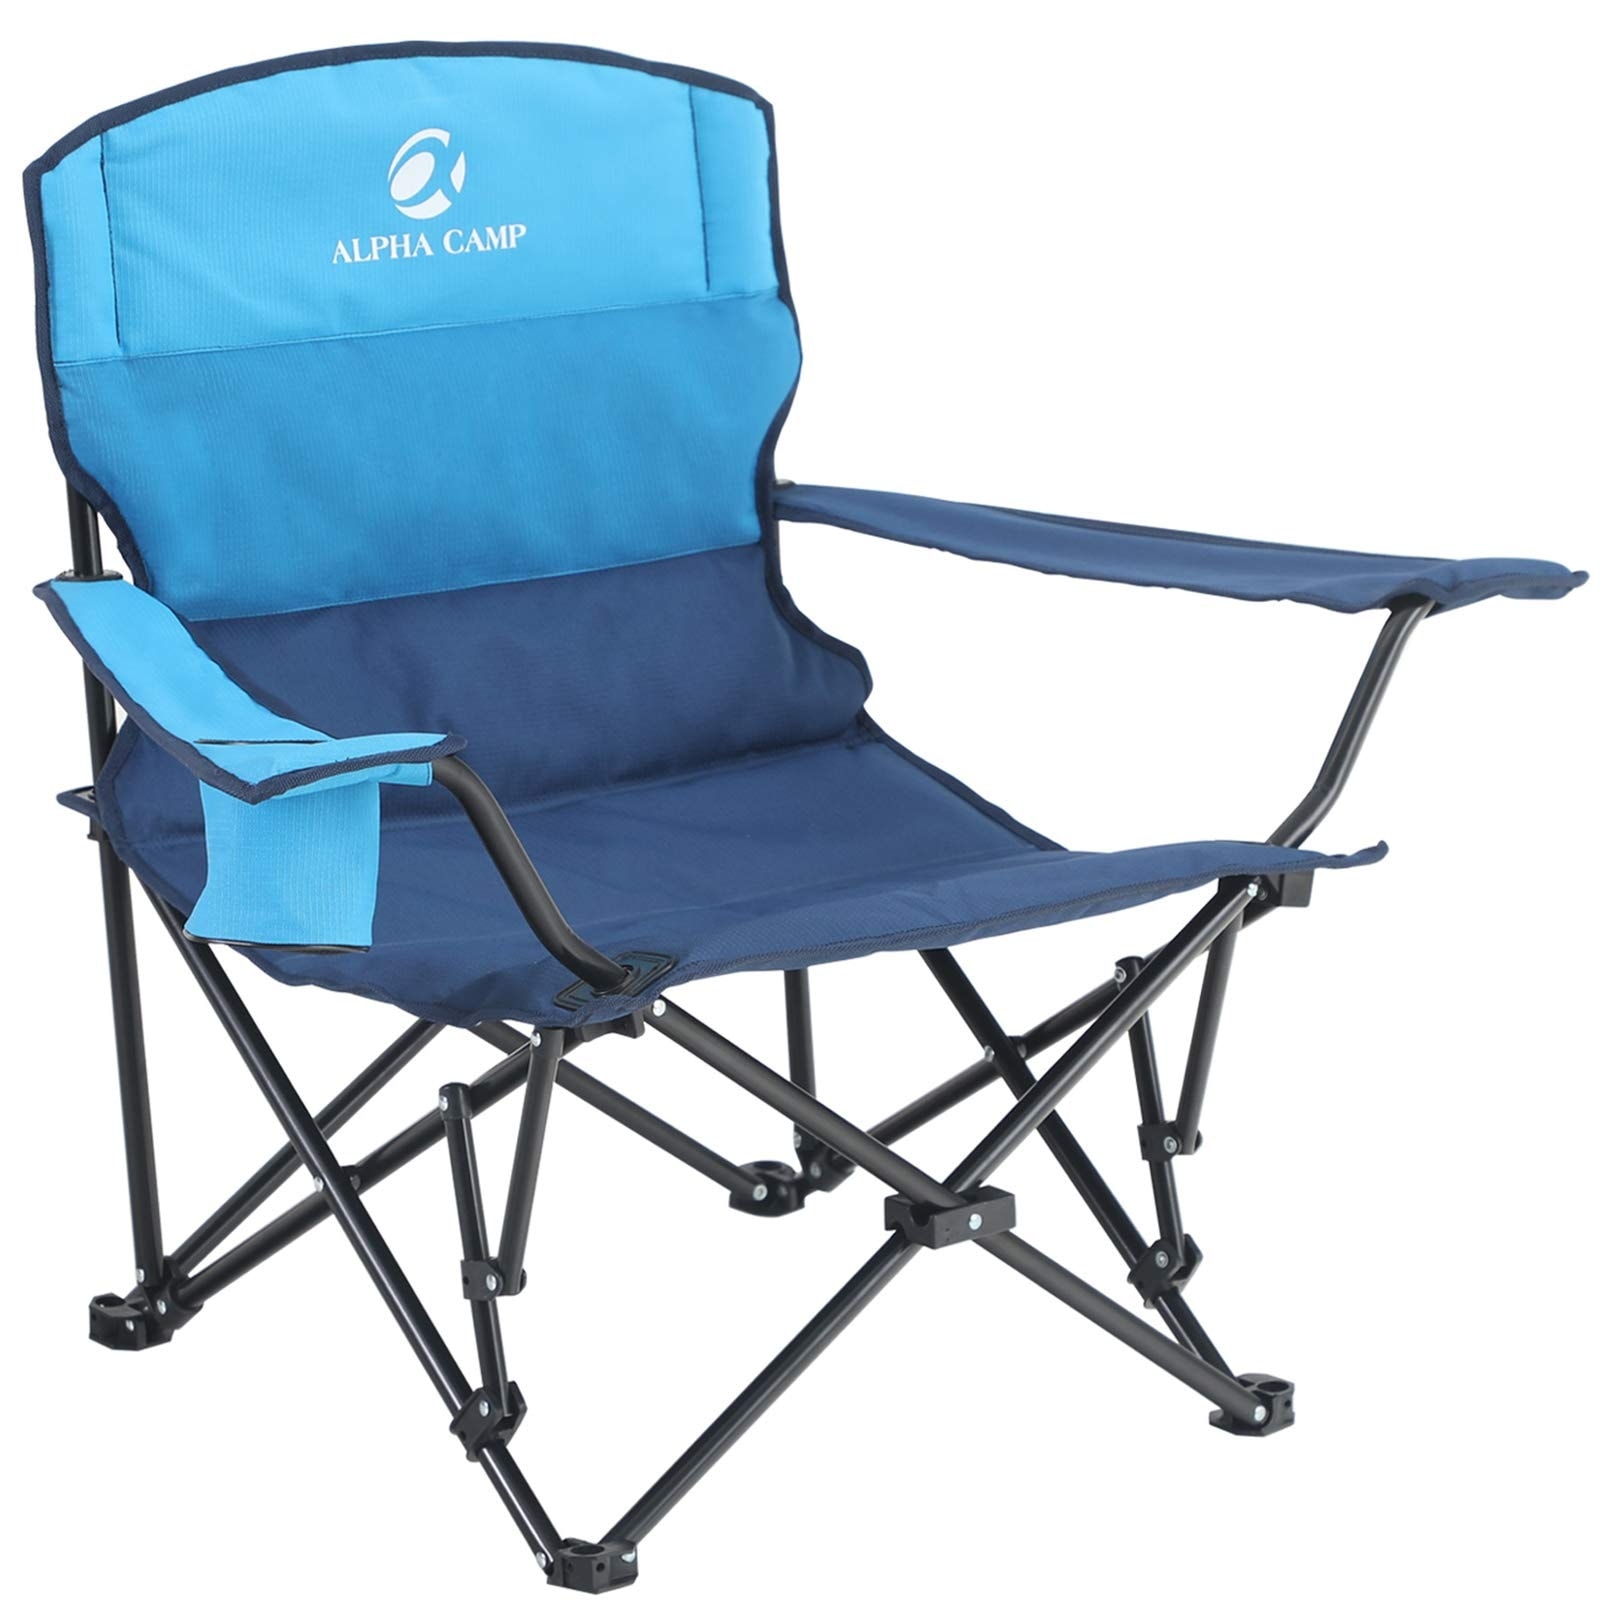 ALPHA CAMP Portable Camping Quad Folding Chair Heavy Duty Support 300 LBS  Oversized Steel Frame Collapsible Chair Bed Bath  Beyond 32432583